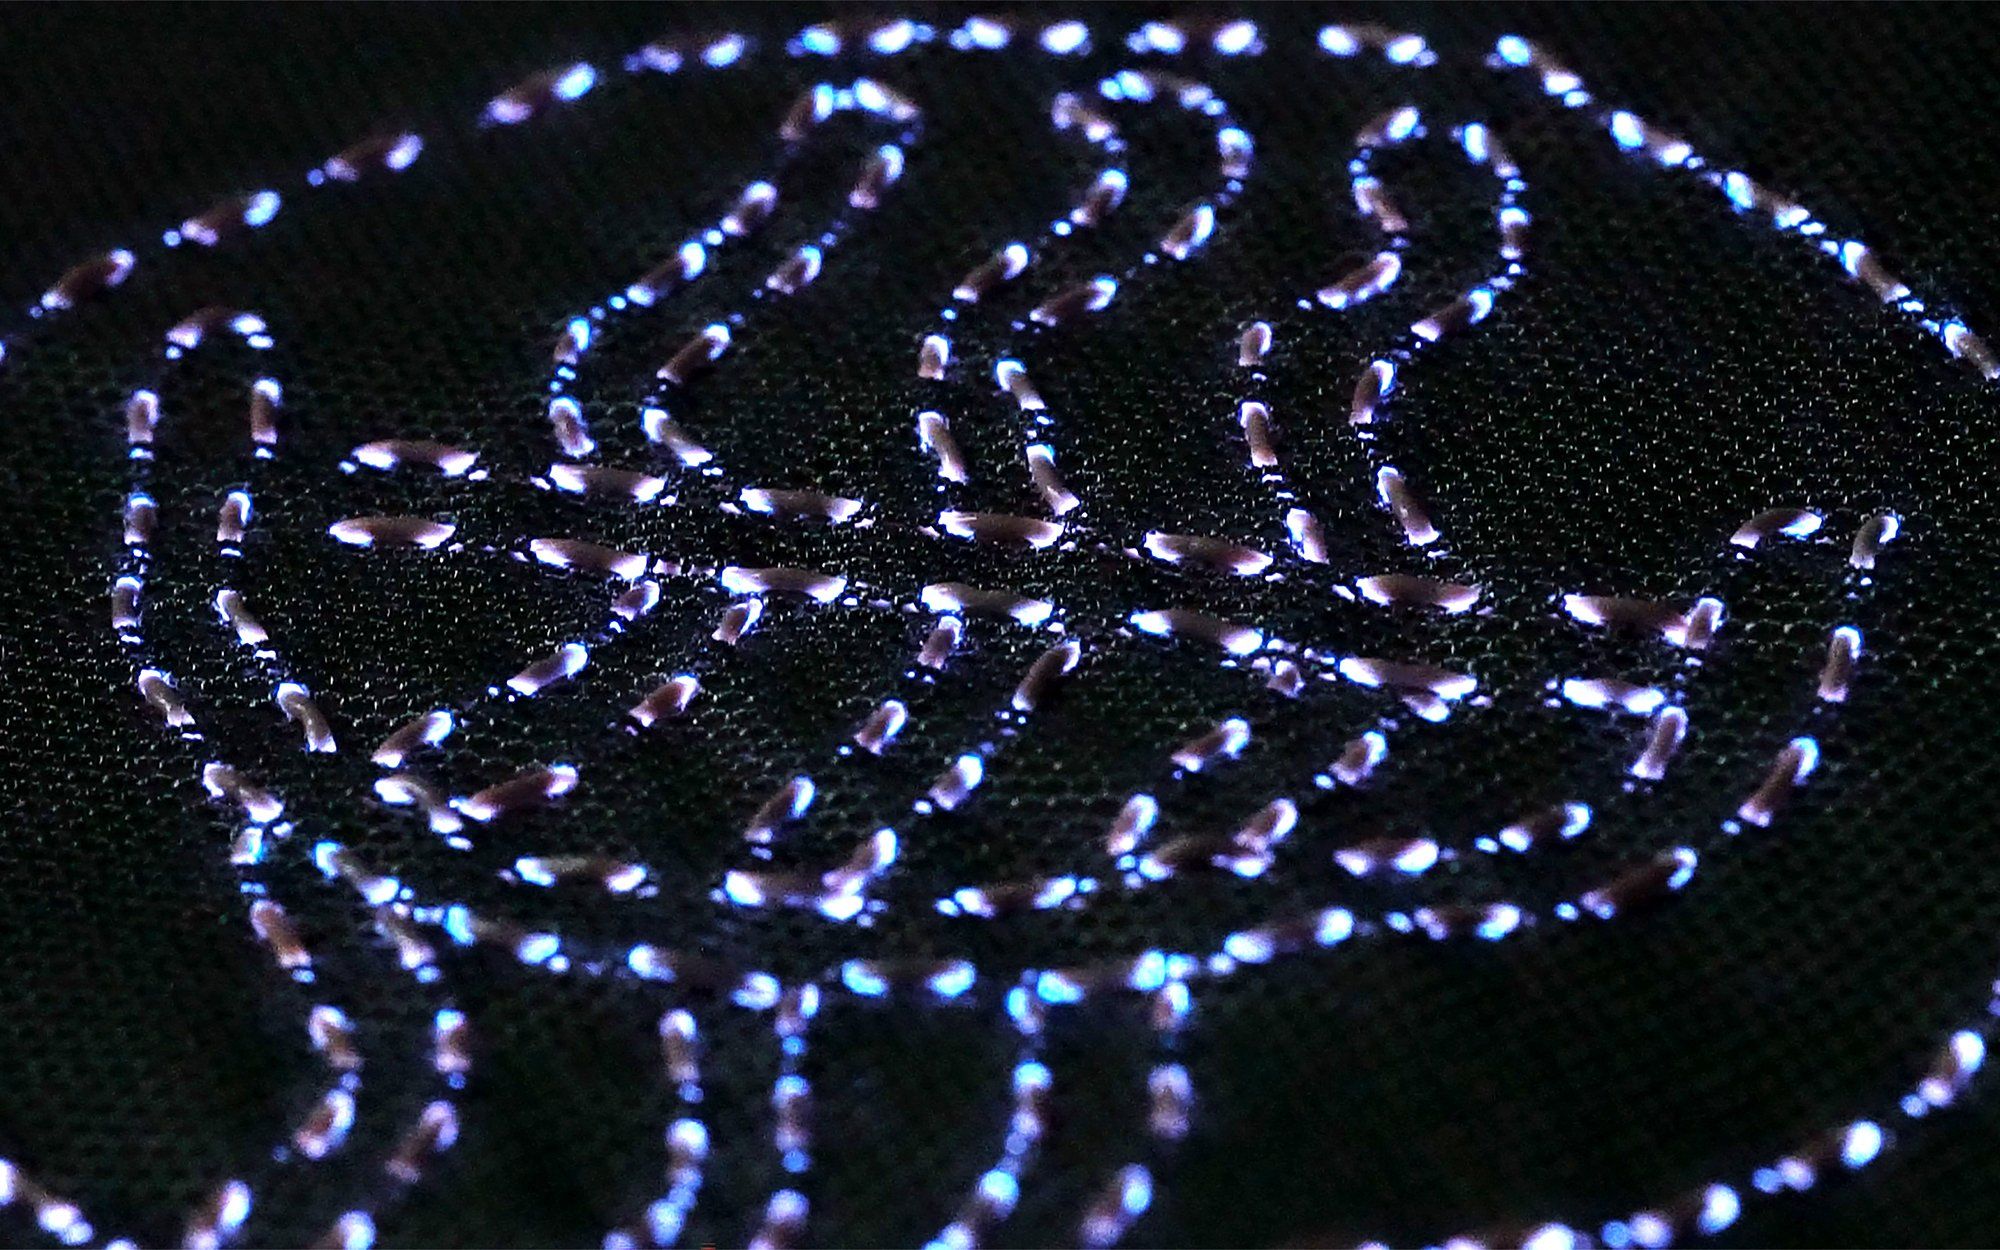 Glowing tubes emit a purplish light, and are woven into a black fabric in a pattern of wavy lines and a circle